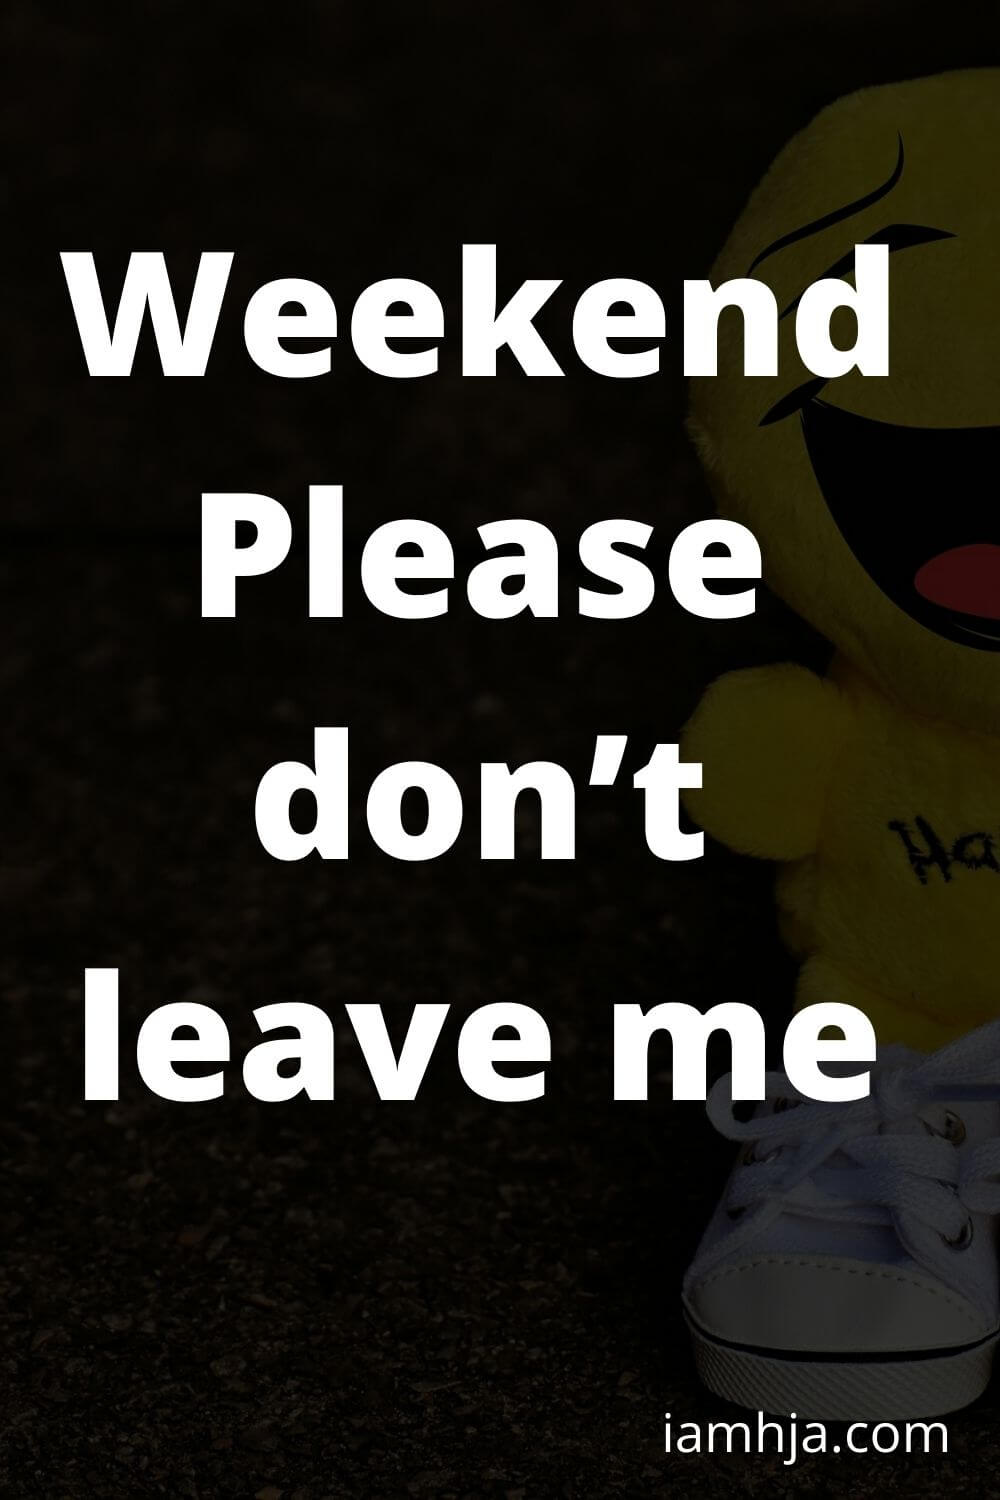 Weekend, please don’t leave me